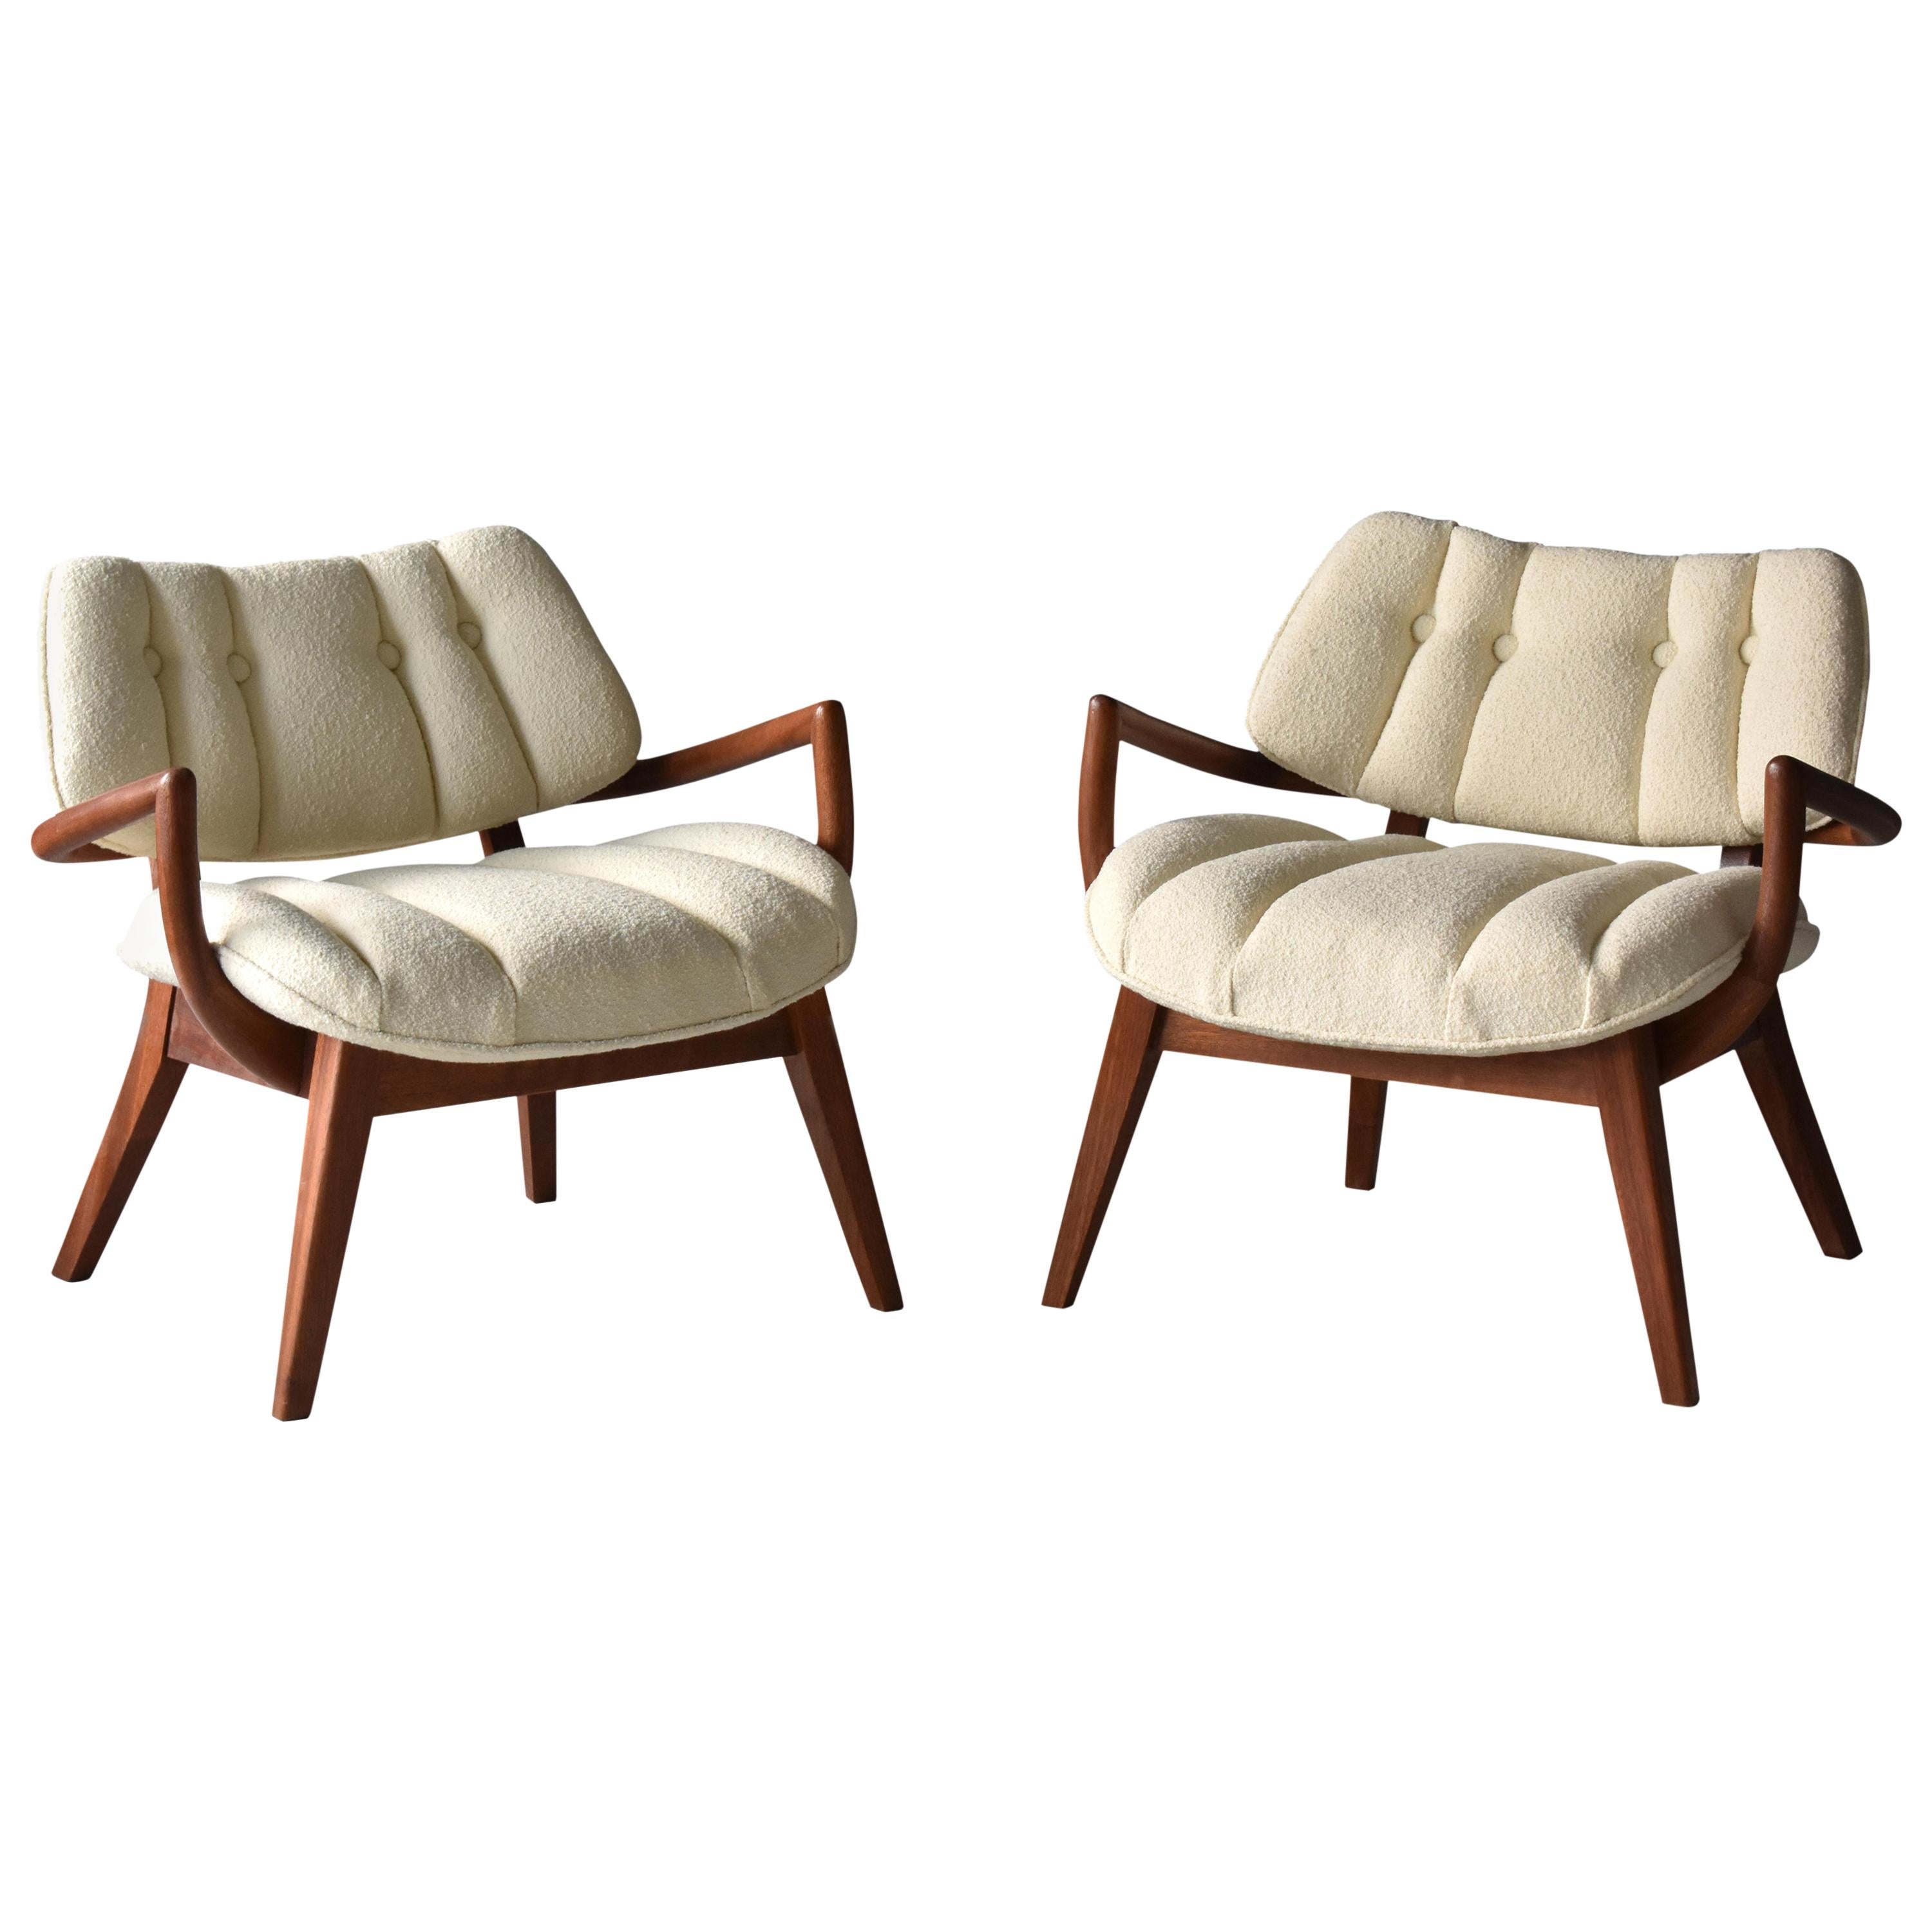 Paul László, (attribution) Lounge Chairs, Mahogany, White Fabric, 1940s America